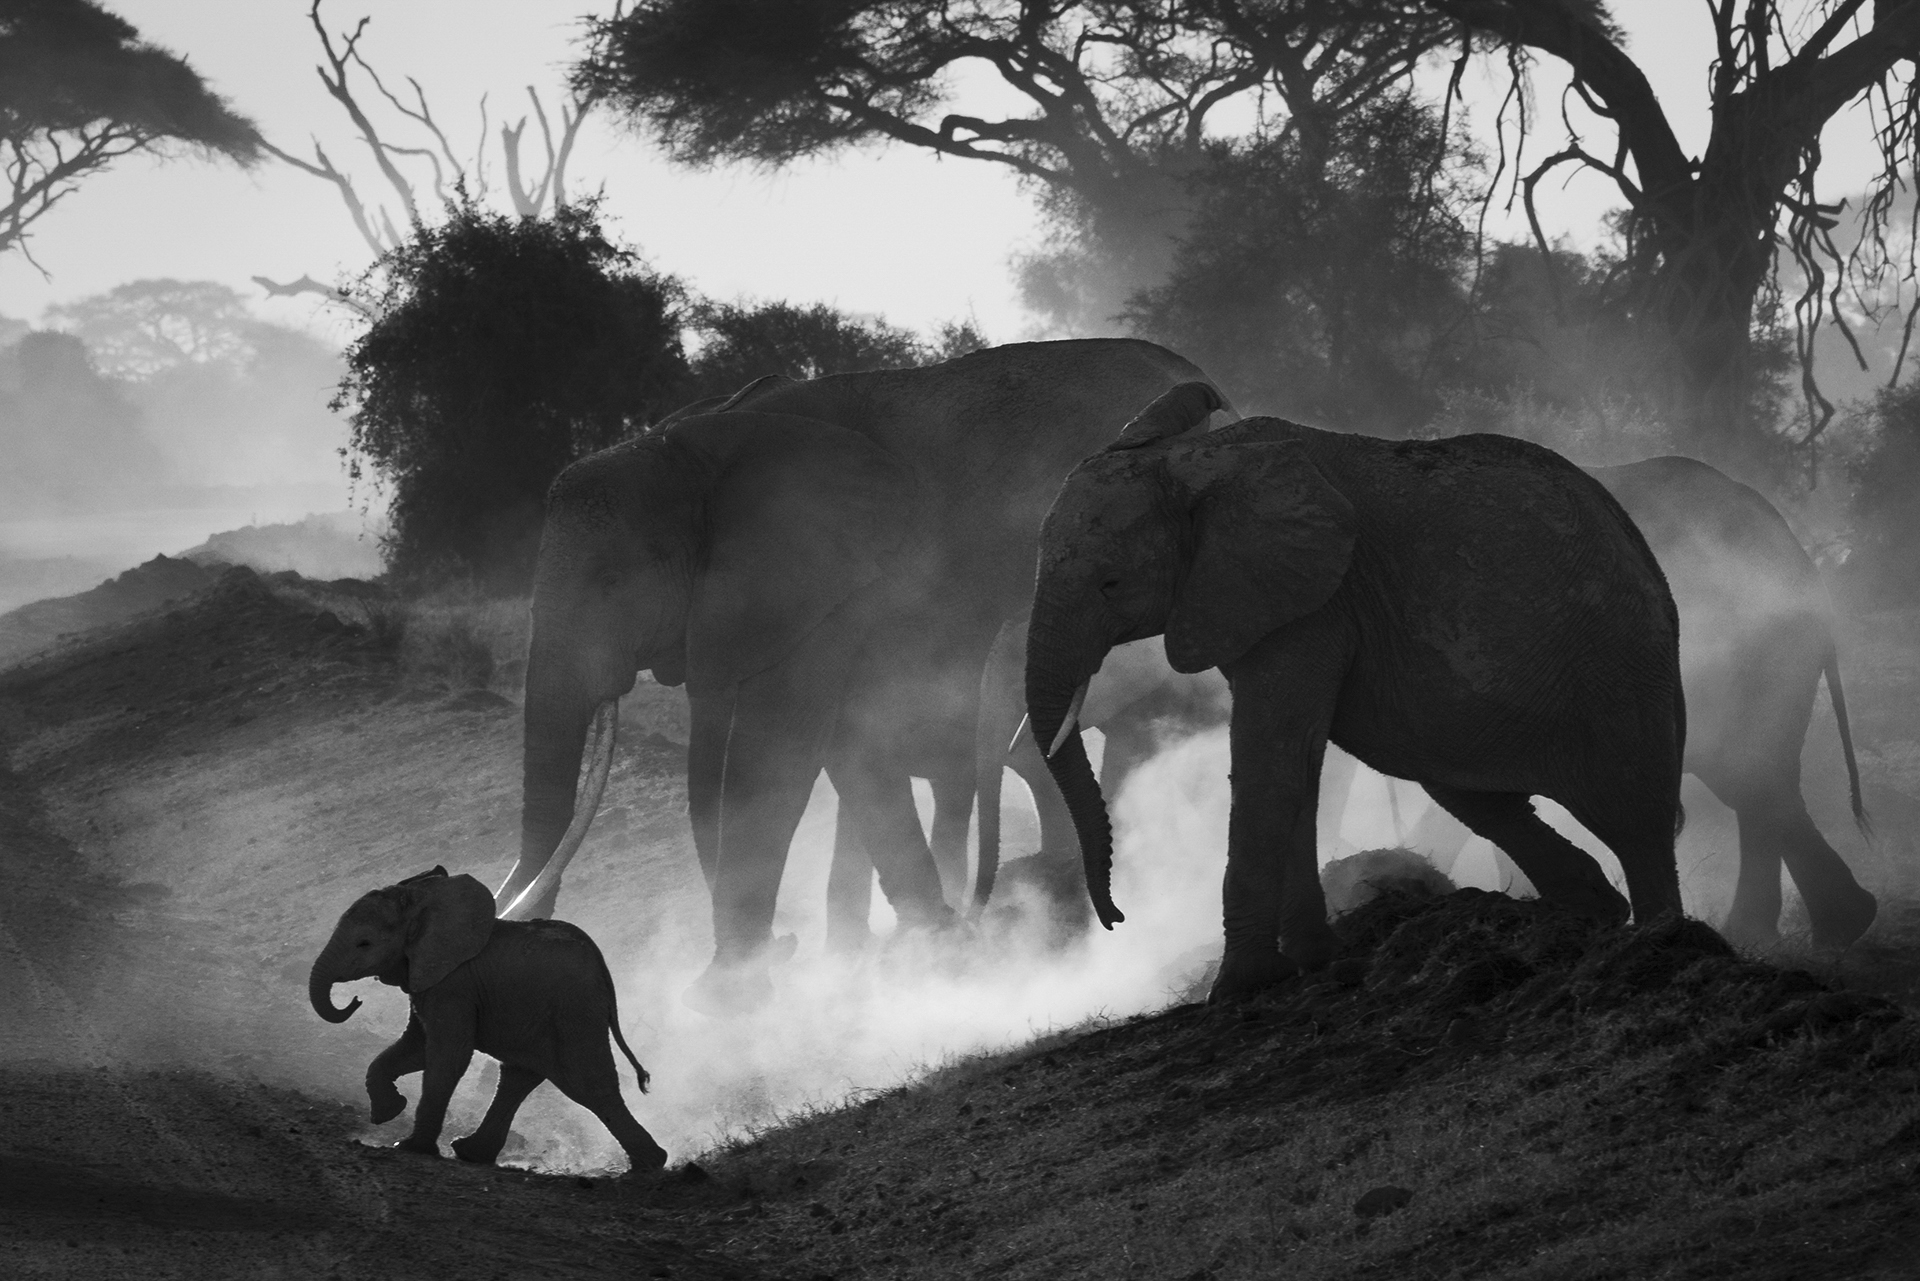 The Journey Award Winning Photo of a small elephant leading elephant family through the road of Amboseli National Park. Buy a canvas, framed or acrylic fine art print.